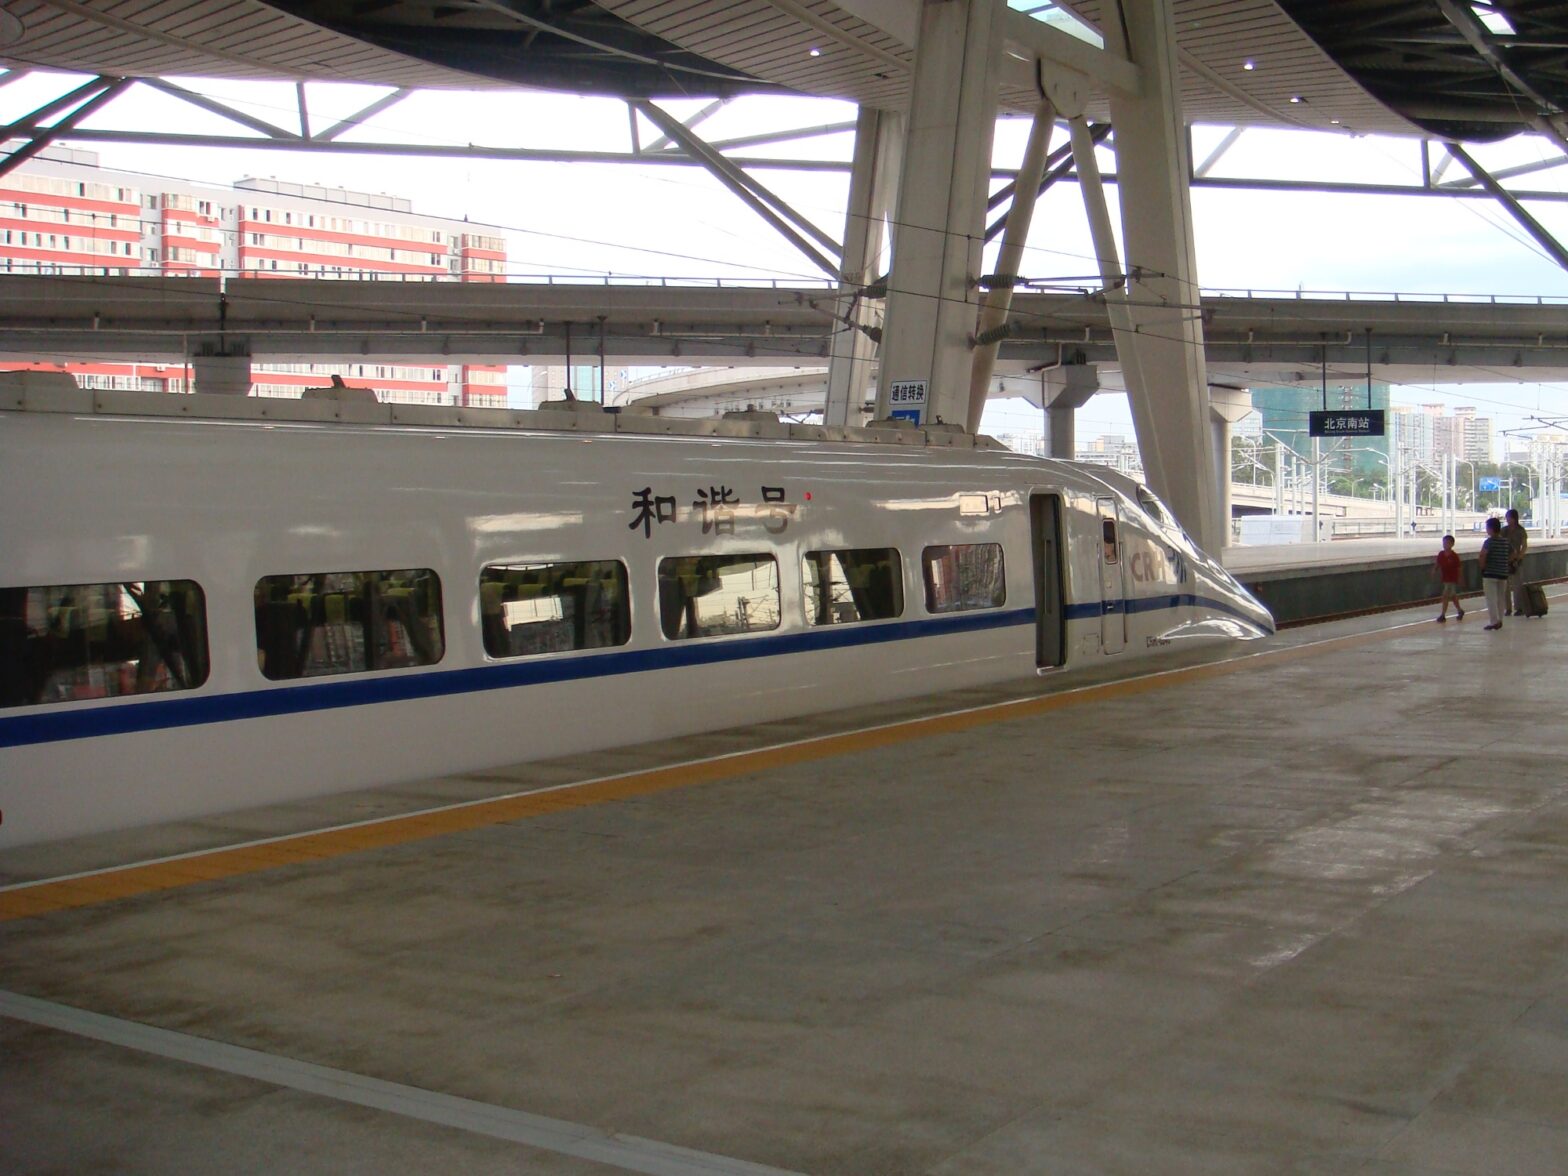 An image of a High Speed train at Beijing South Railway Station